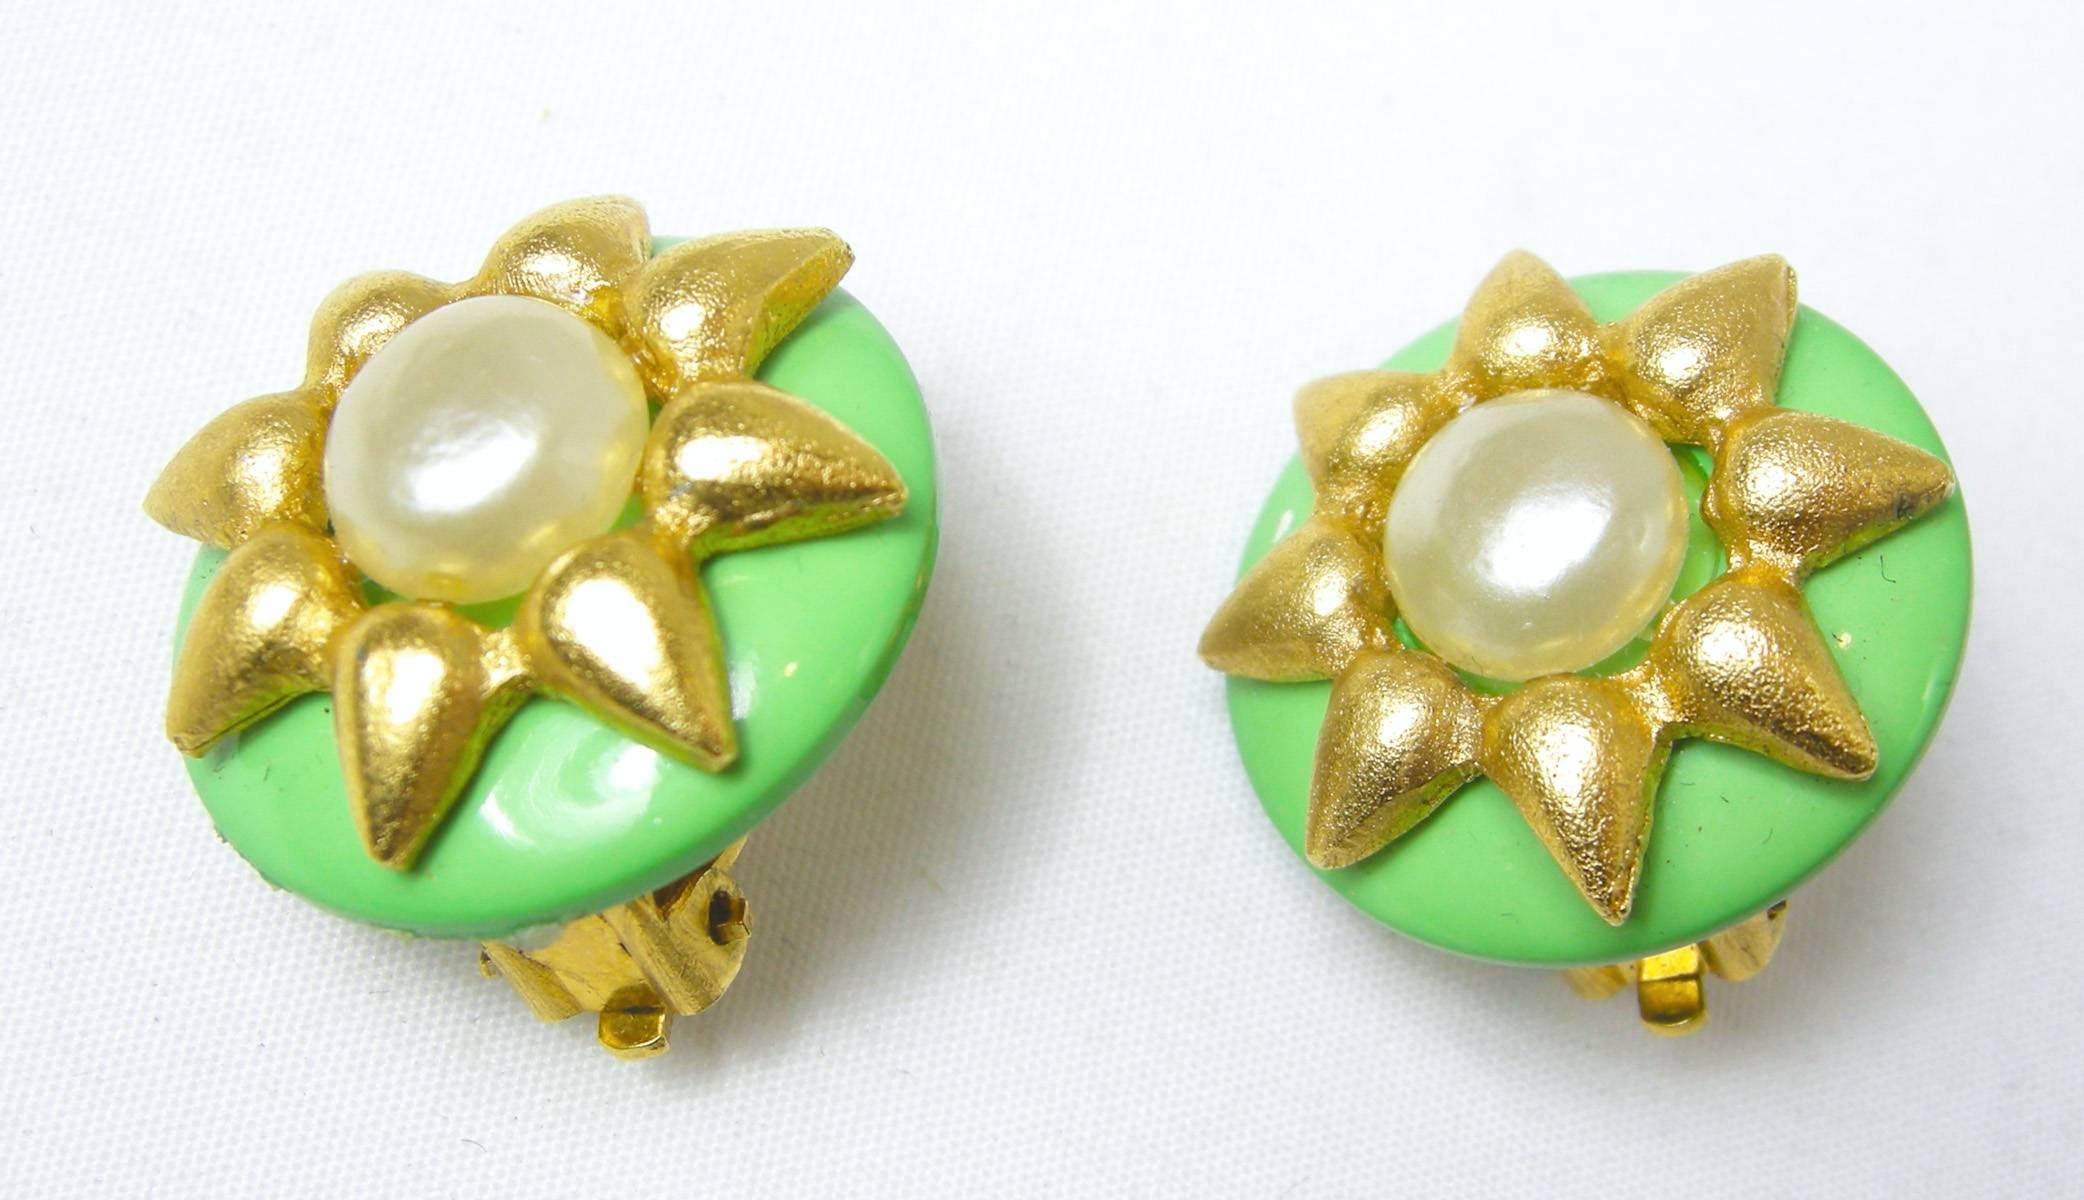 These Chanel green enamel round earrings feature a sunflower setting in a gold tone metal finish with a faux pearl in the center. They measure 1” x 1”.  They are signed “Chanel 95C” and “Made in France”. They are in excellent condition.